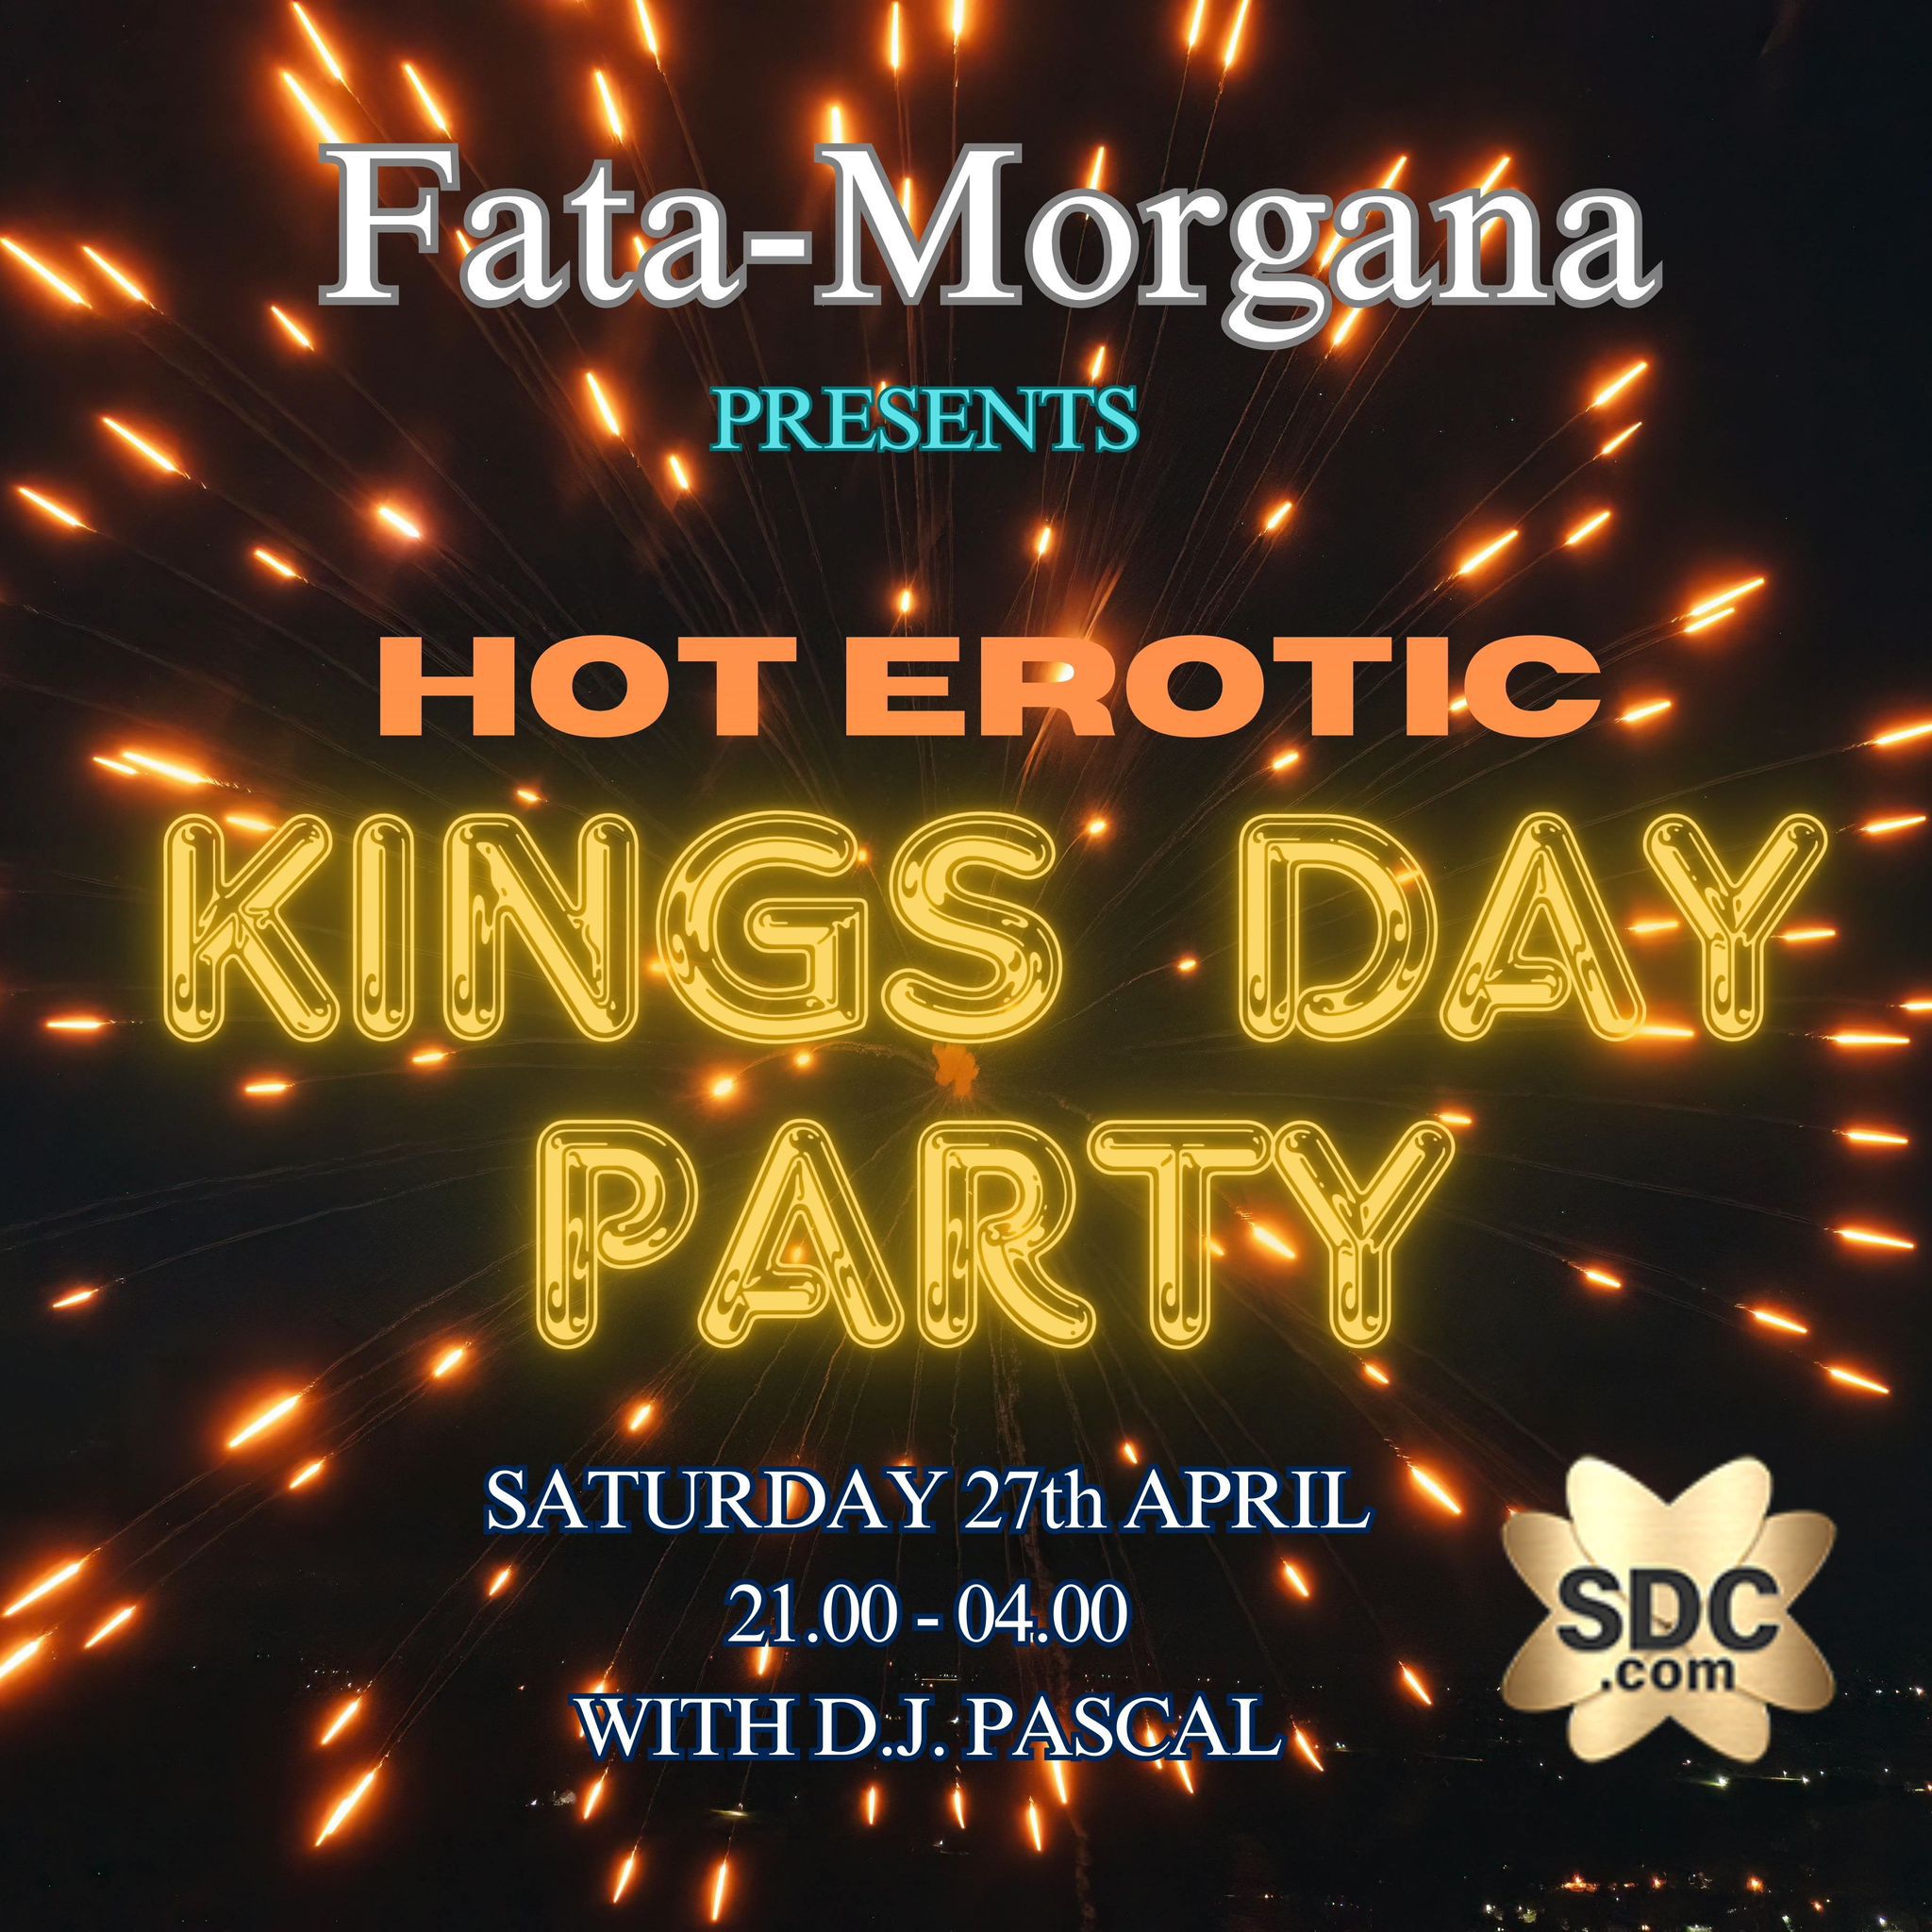 Kingsday party